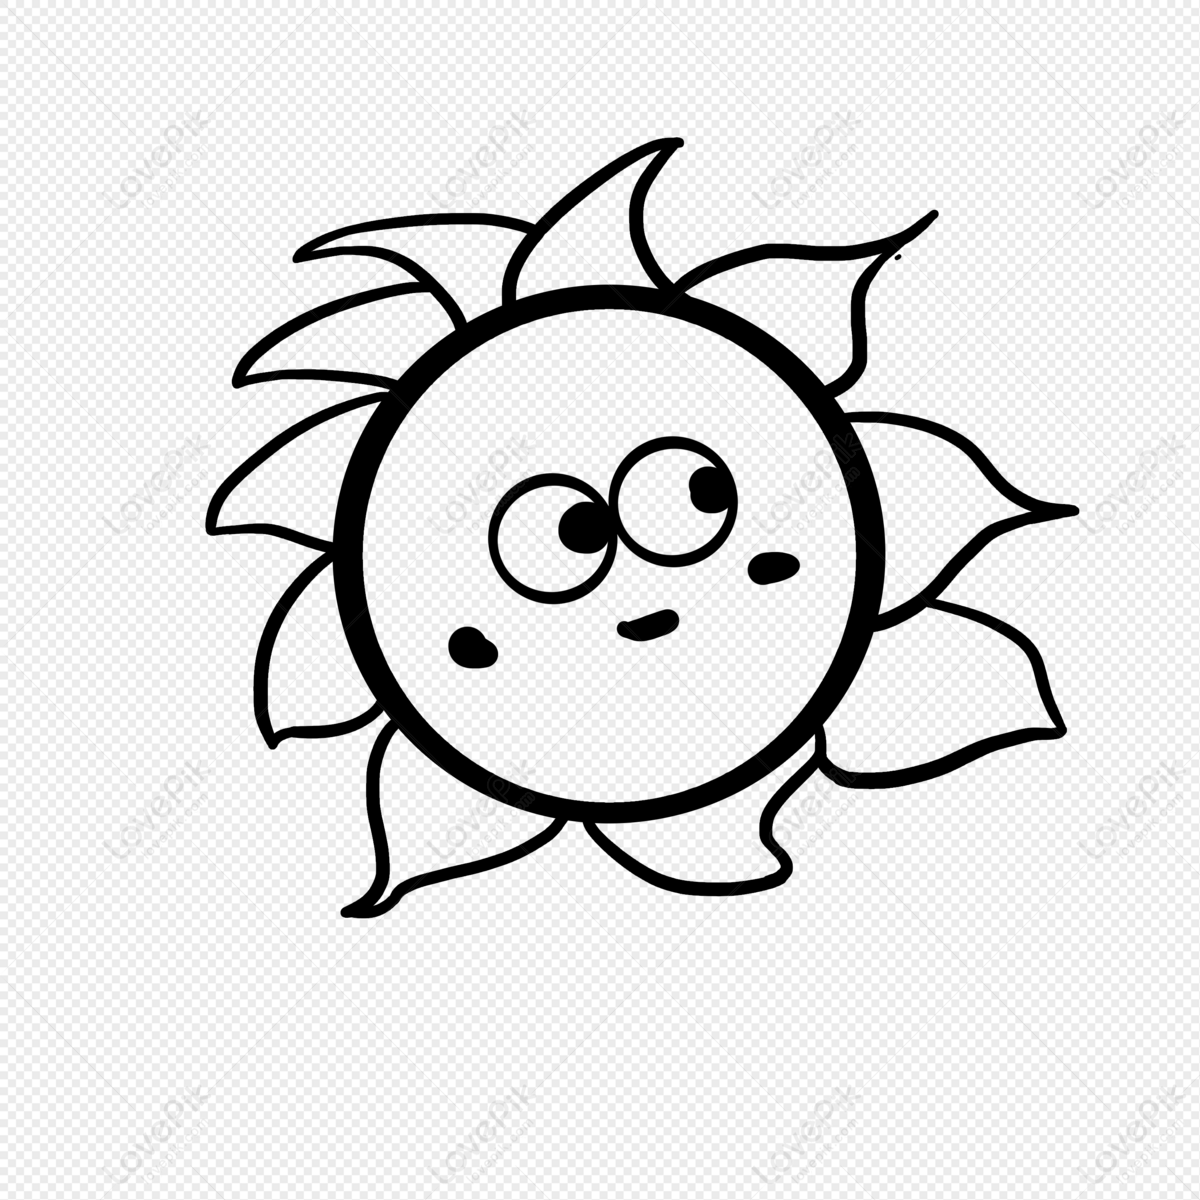 Cartoon Sun Flower Stick Figure PNG Image Free Download And Clipart Image  For Free Download - Lovepik | 401189621